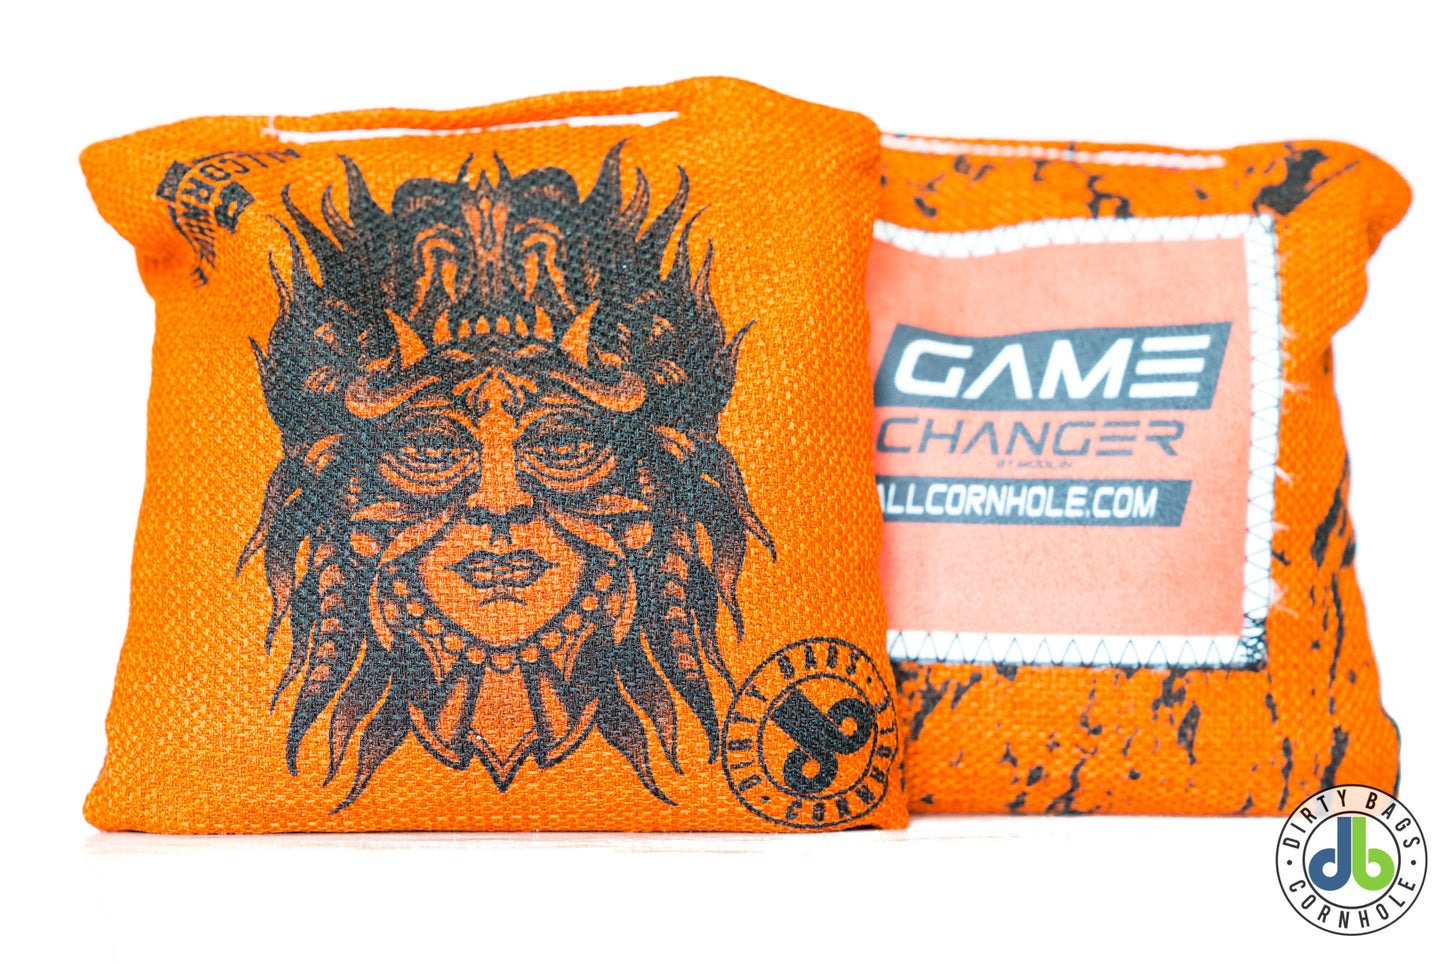 Game Changer Cornhole Bags - Two Face (Set of 4)